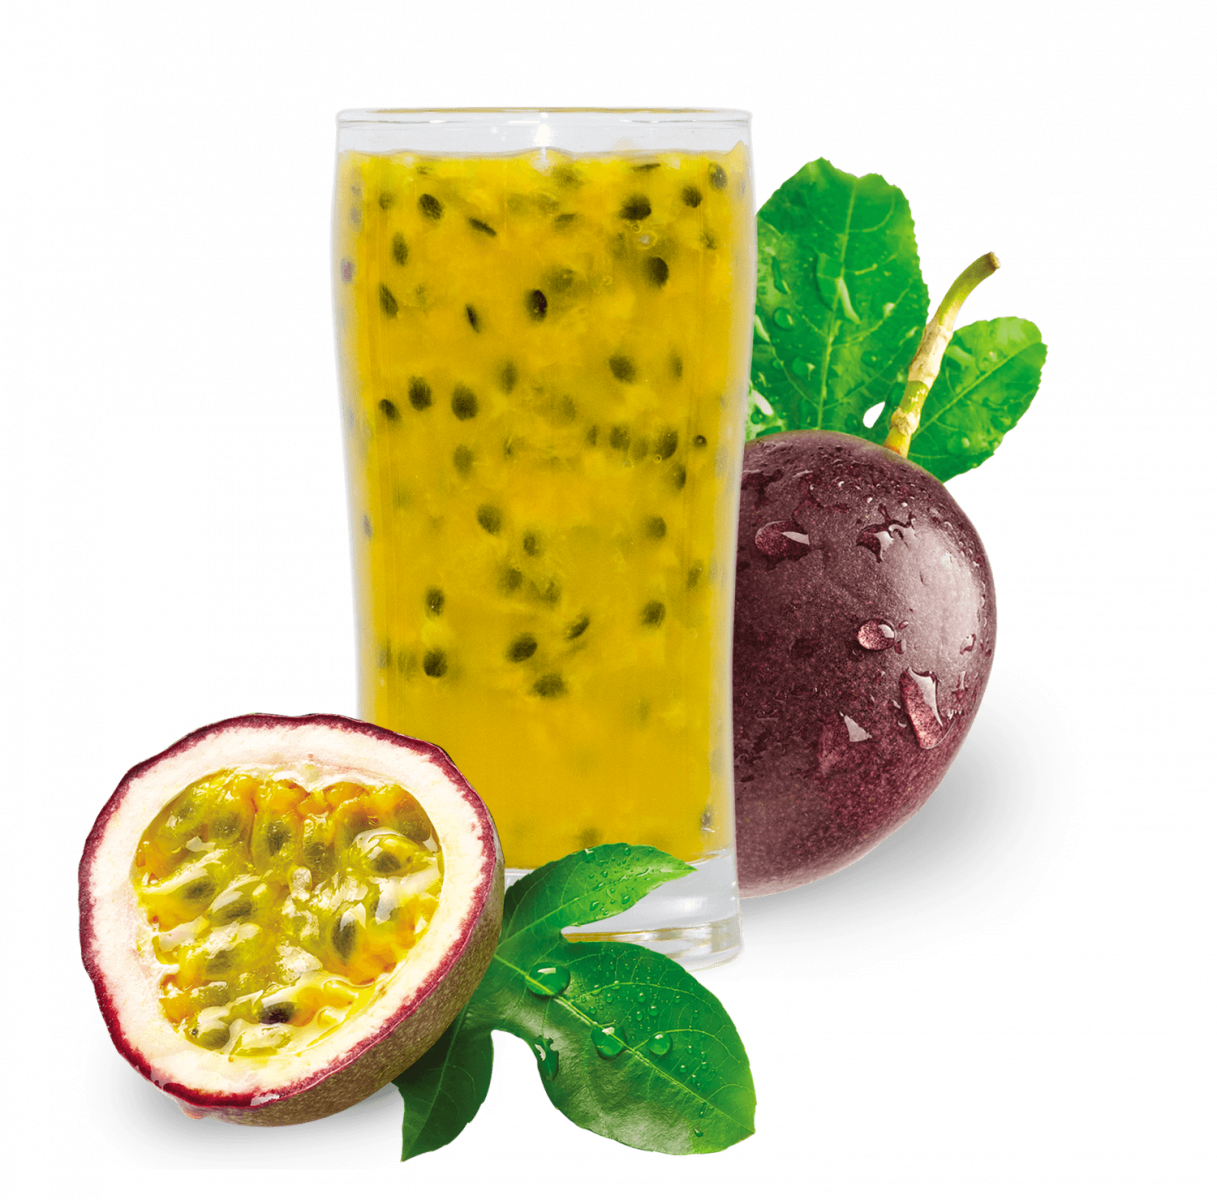 http://www.lavifood.com/en/products/concentrate/passion-fruit-1